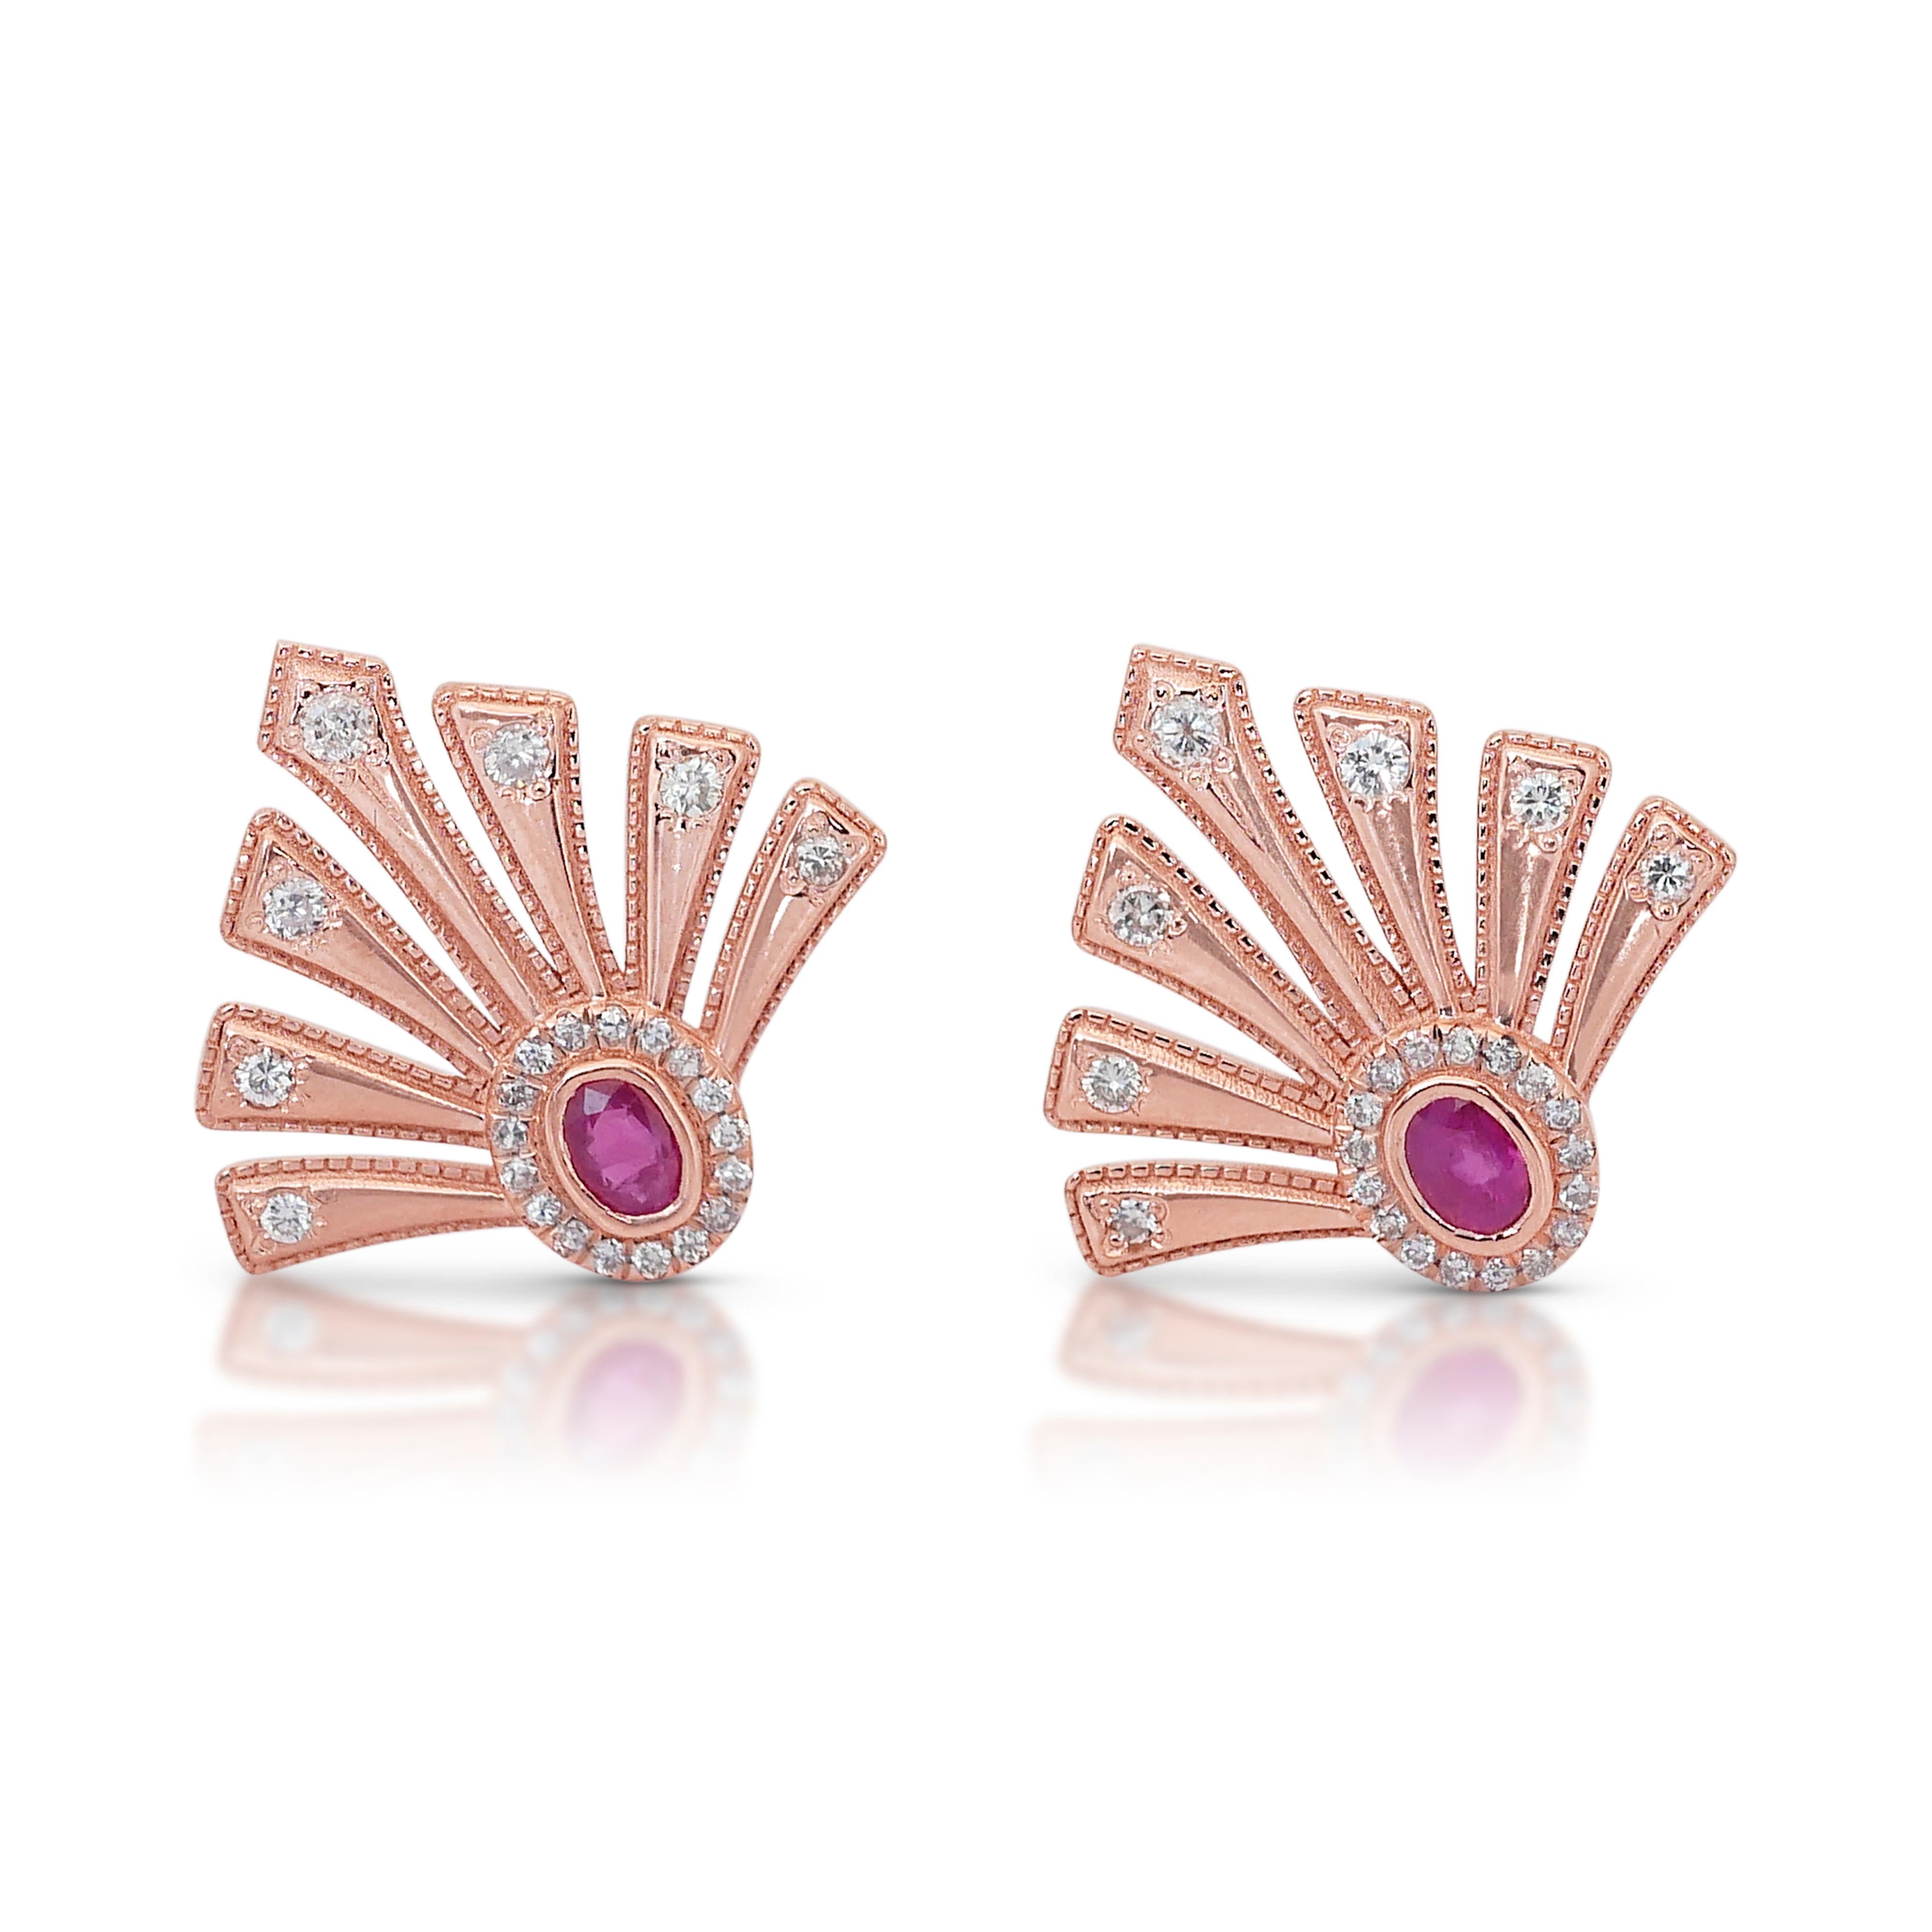 Art deco style 0.75ct Rubies and Diamonds one of a kind Stud Earrings in 14k Rose Gold - AIG Certified

Add a touch of elegance with these captivating 14k rose gold stud earrings, featuring two stunning oval-shaped rubies with a total carat weight